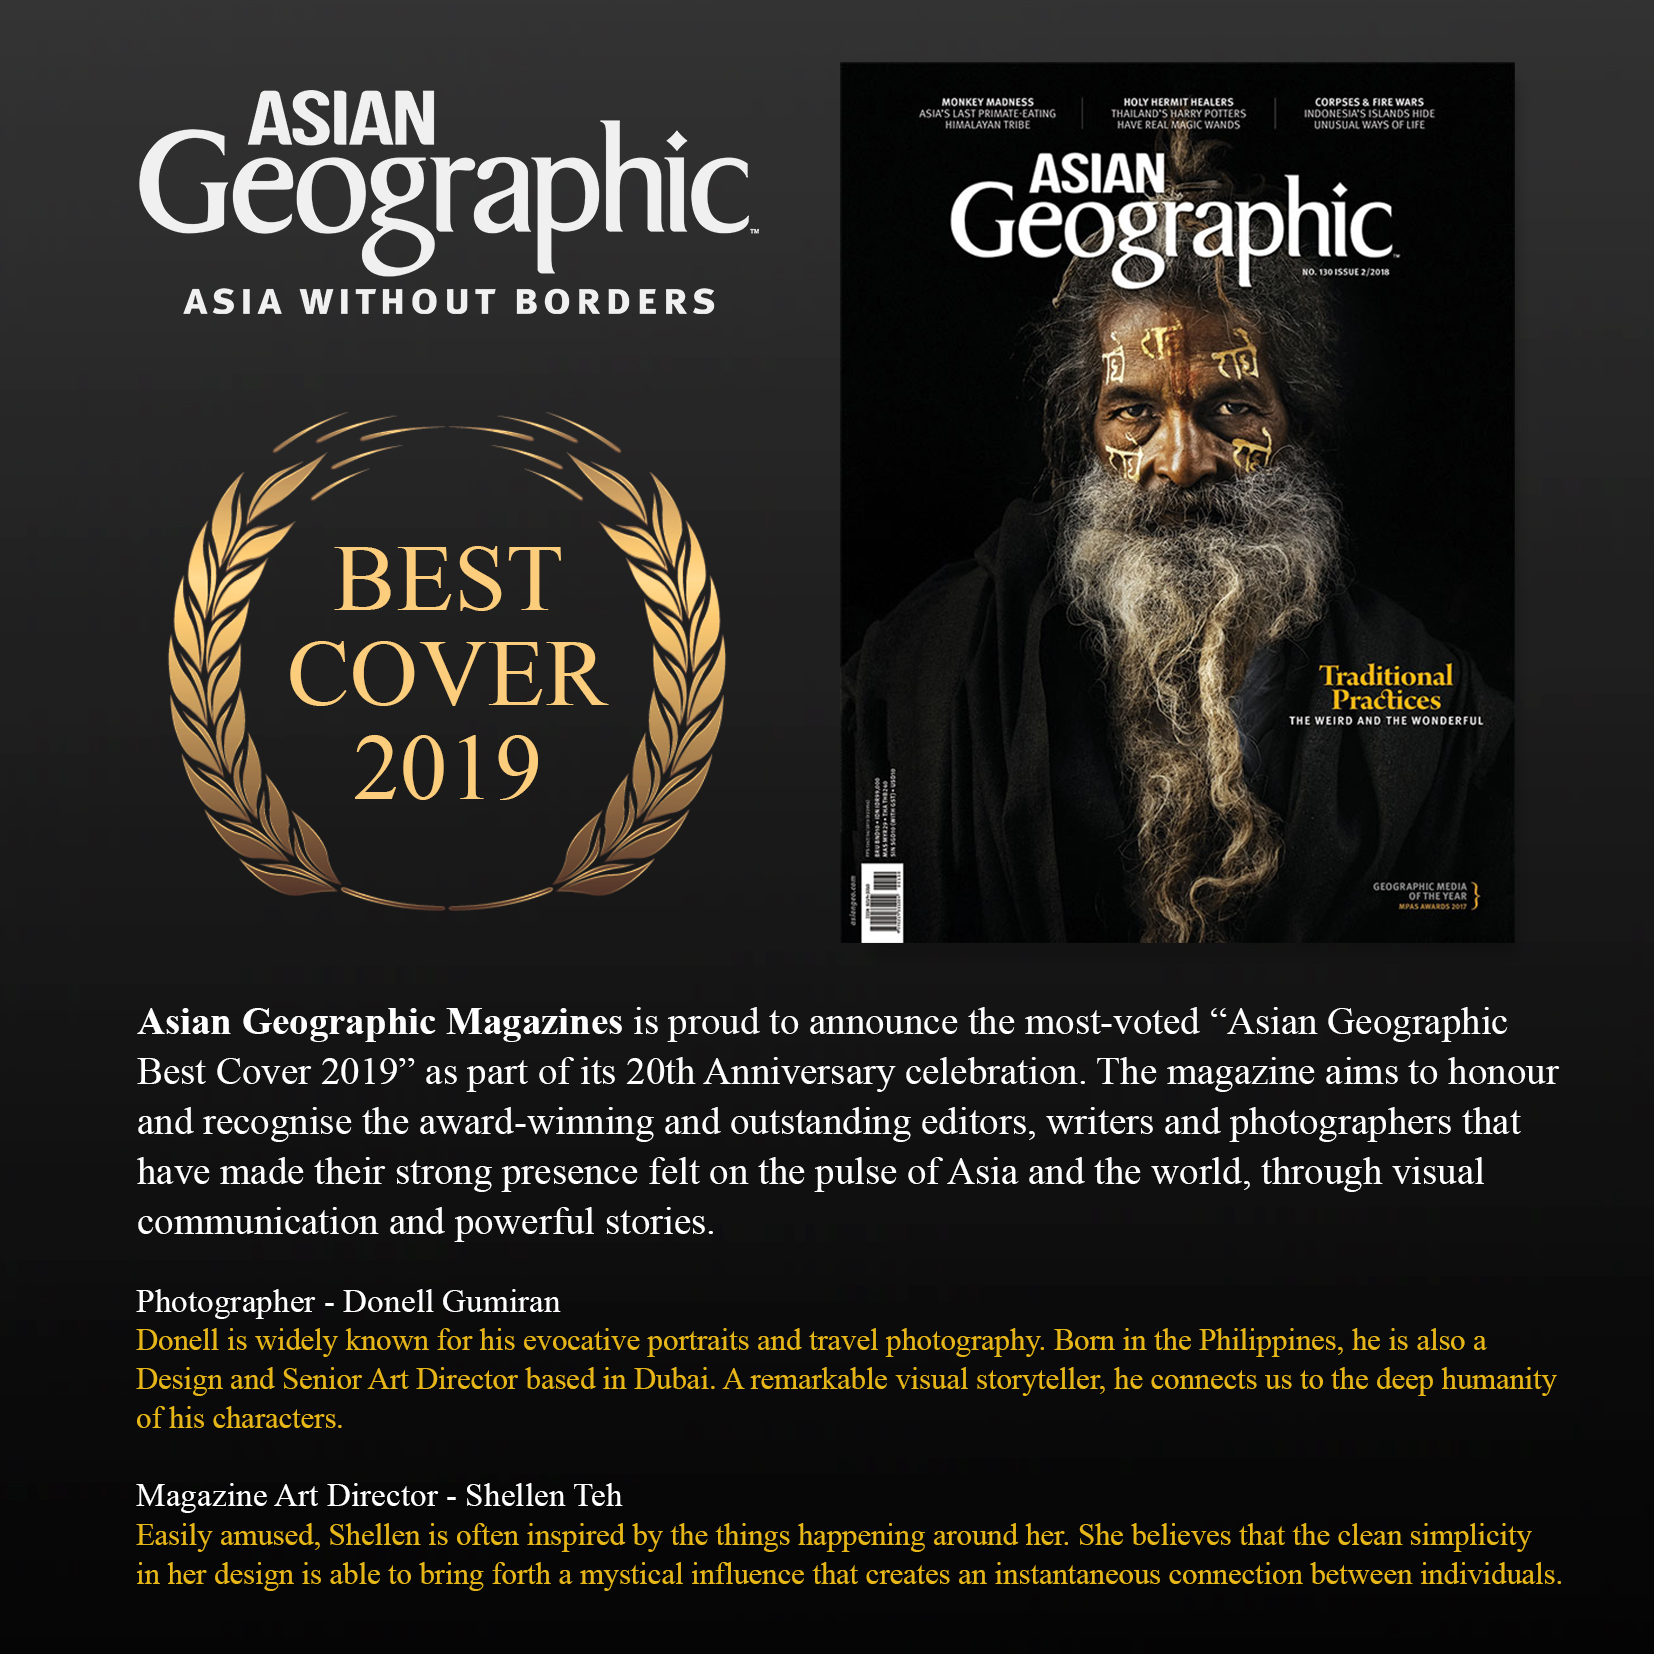 Asian Geographic Best Cover 2019 Donell Gumiran and Shellen Teh